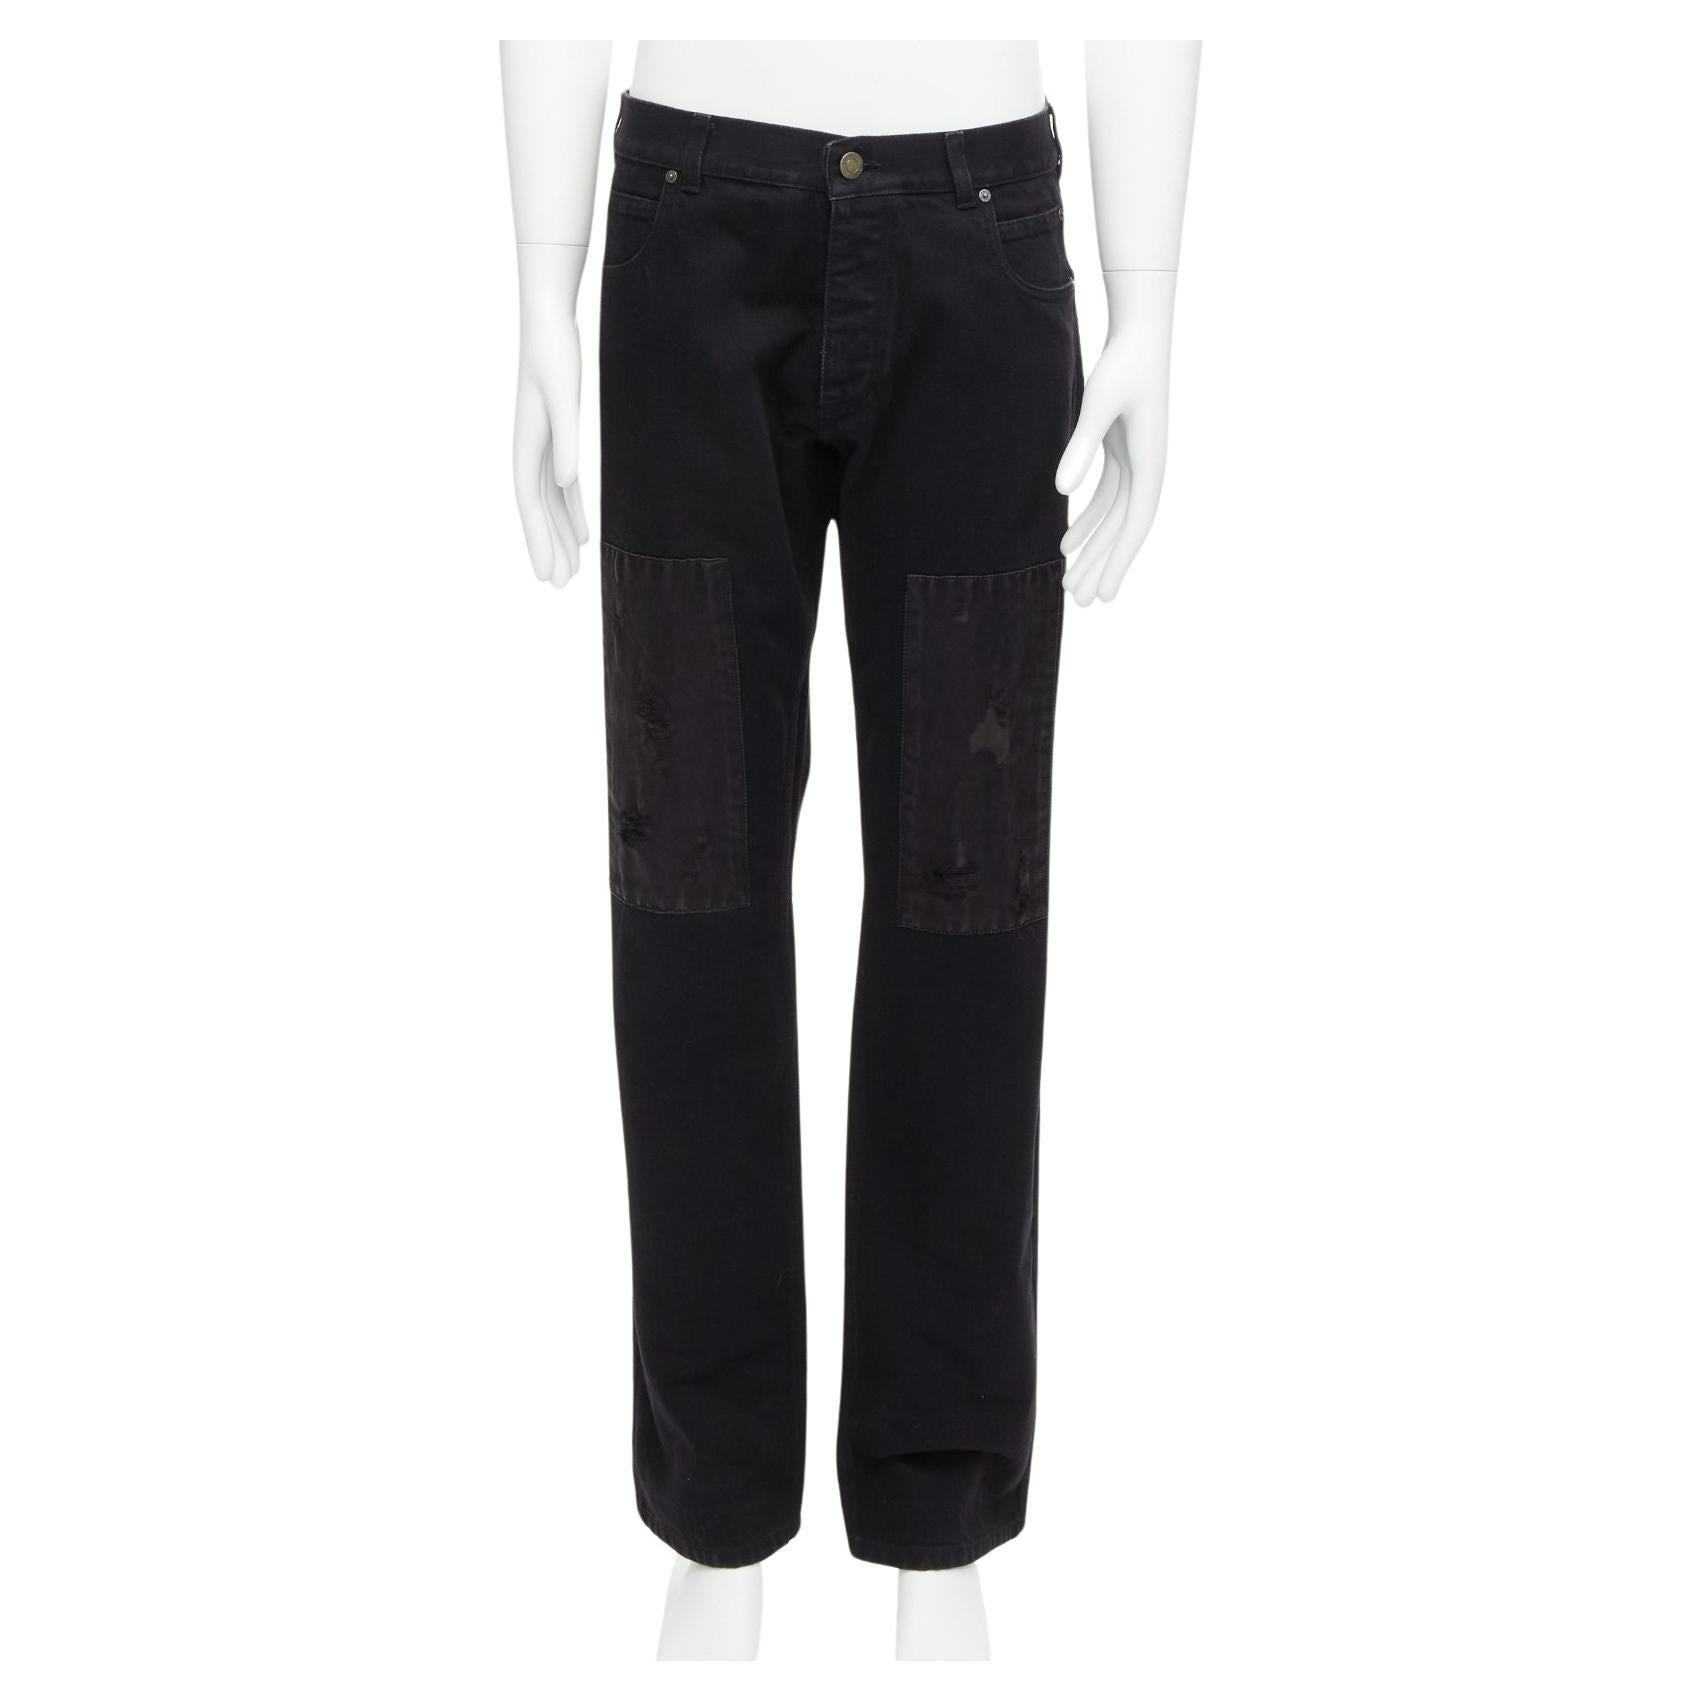 CALVINKLEIN205W39NYC Uniform Pant with Side Stripe Scarlet – Neighbour